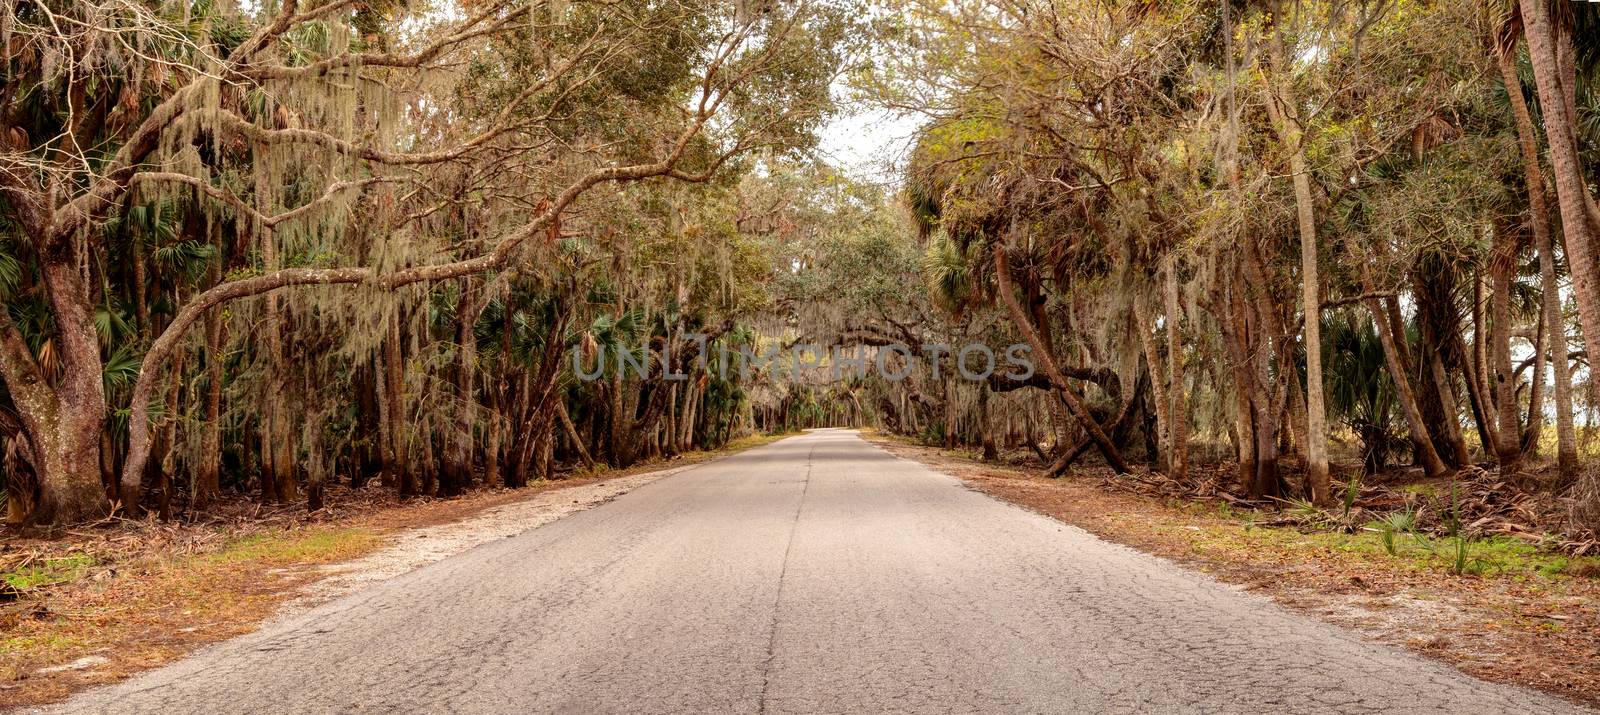 Moss covered trees line a road along the wetland and marsh at the Myakka River State Park in Sarasota, Florida, USA